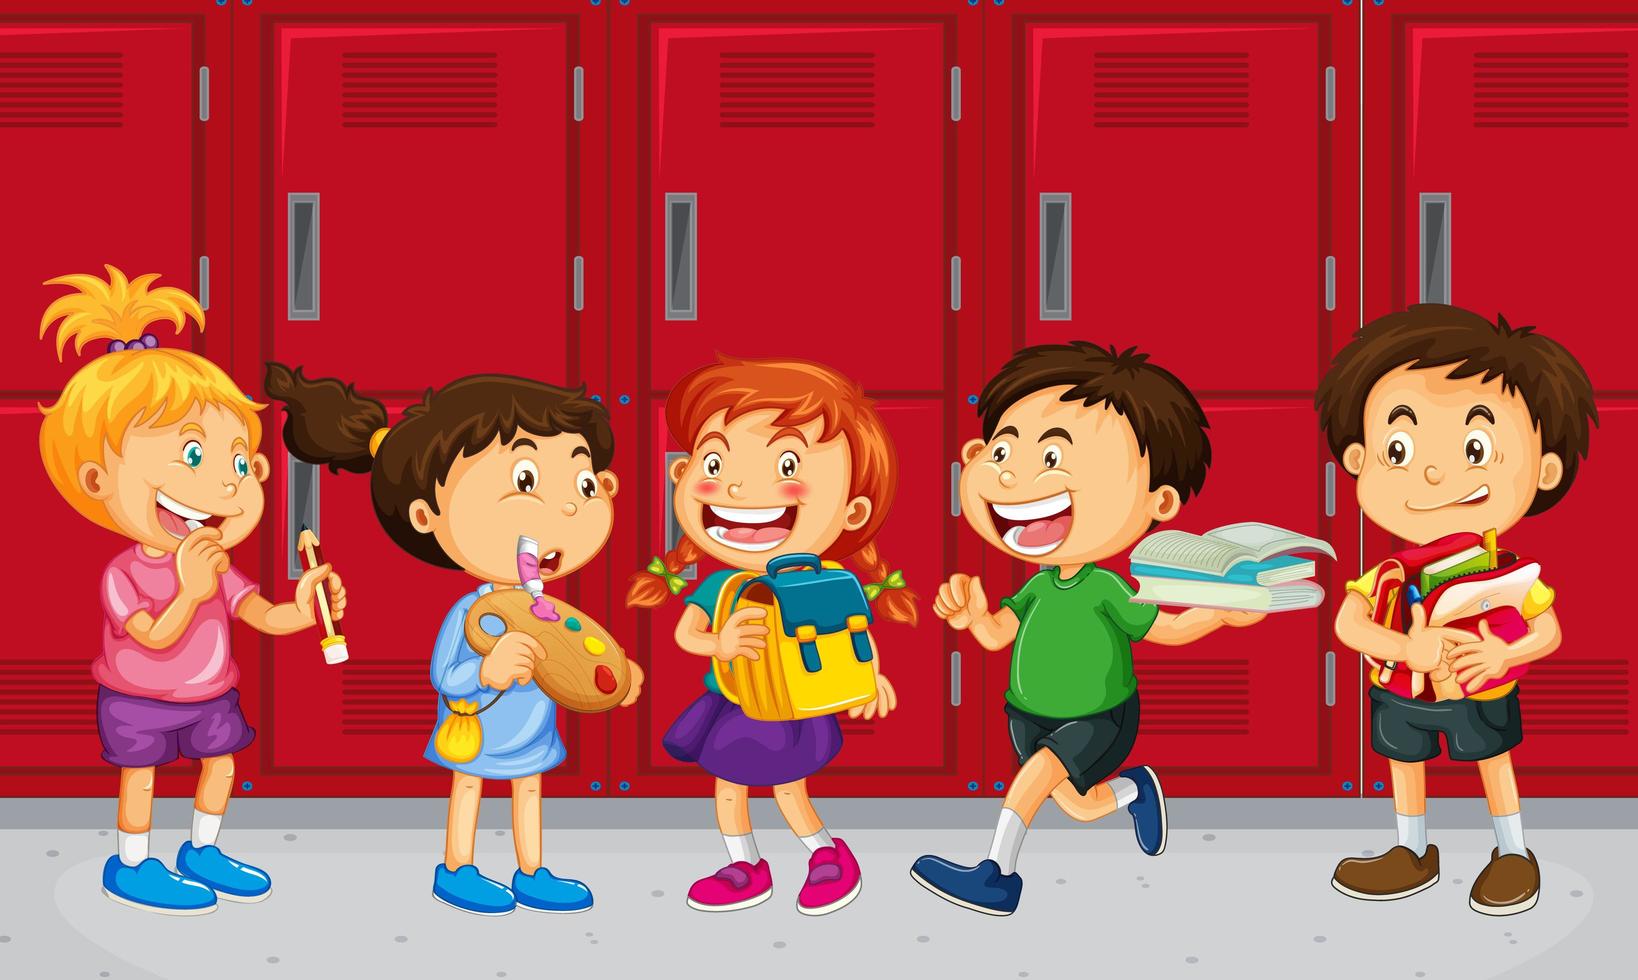 Children talking with their friends with school lockers background vector